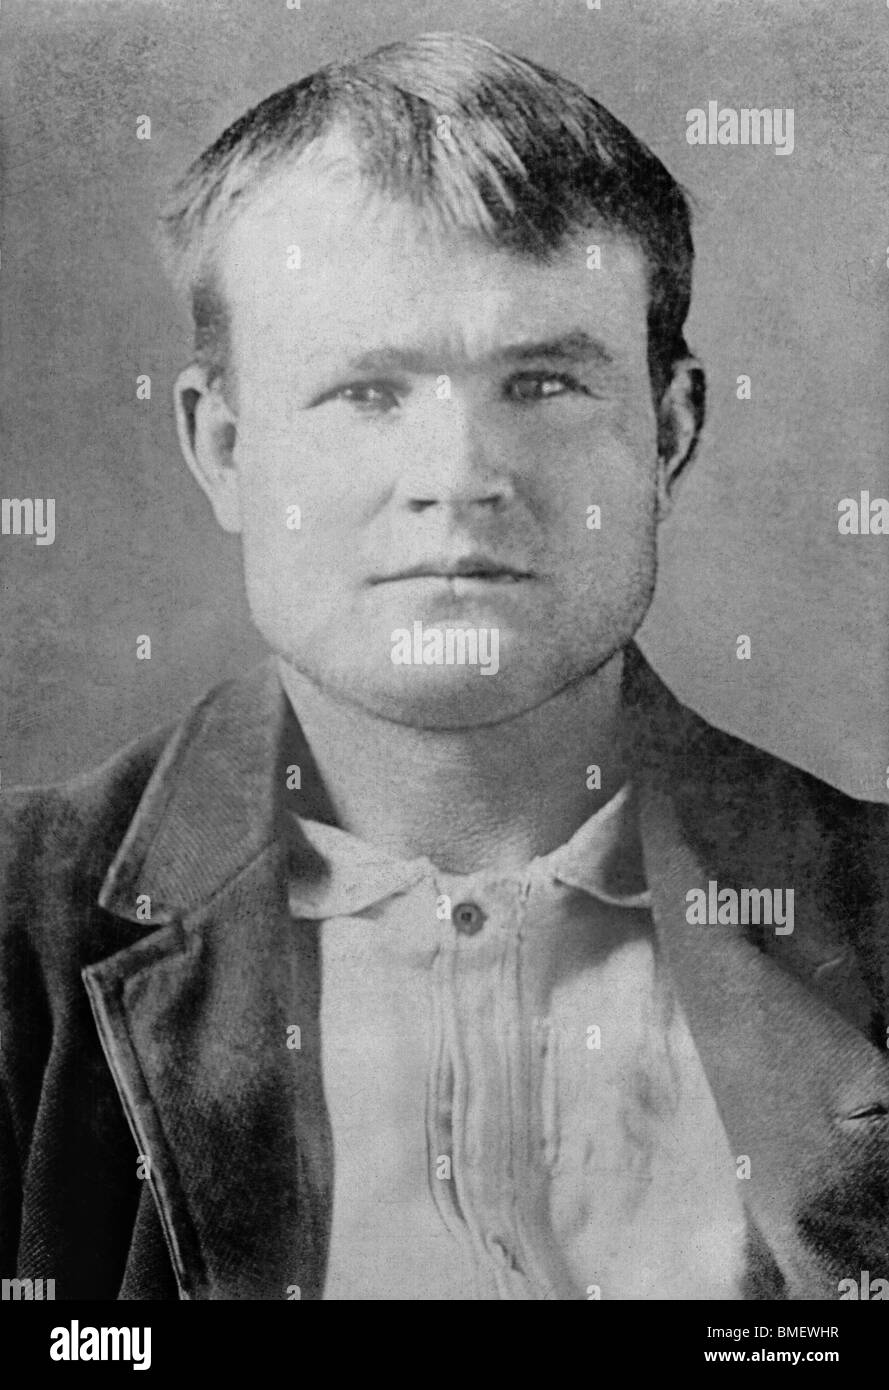 Vintage prison photo c1893 of notorious American outlaw Butch Cassidy (1866 - c1908), real name Robert LeRoy Parker. Stock Photo